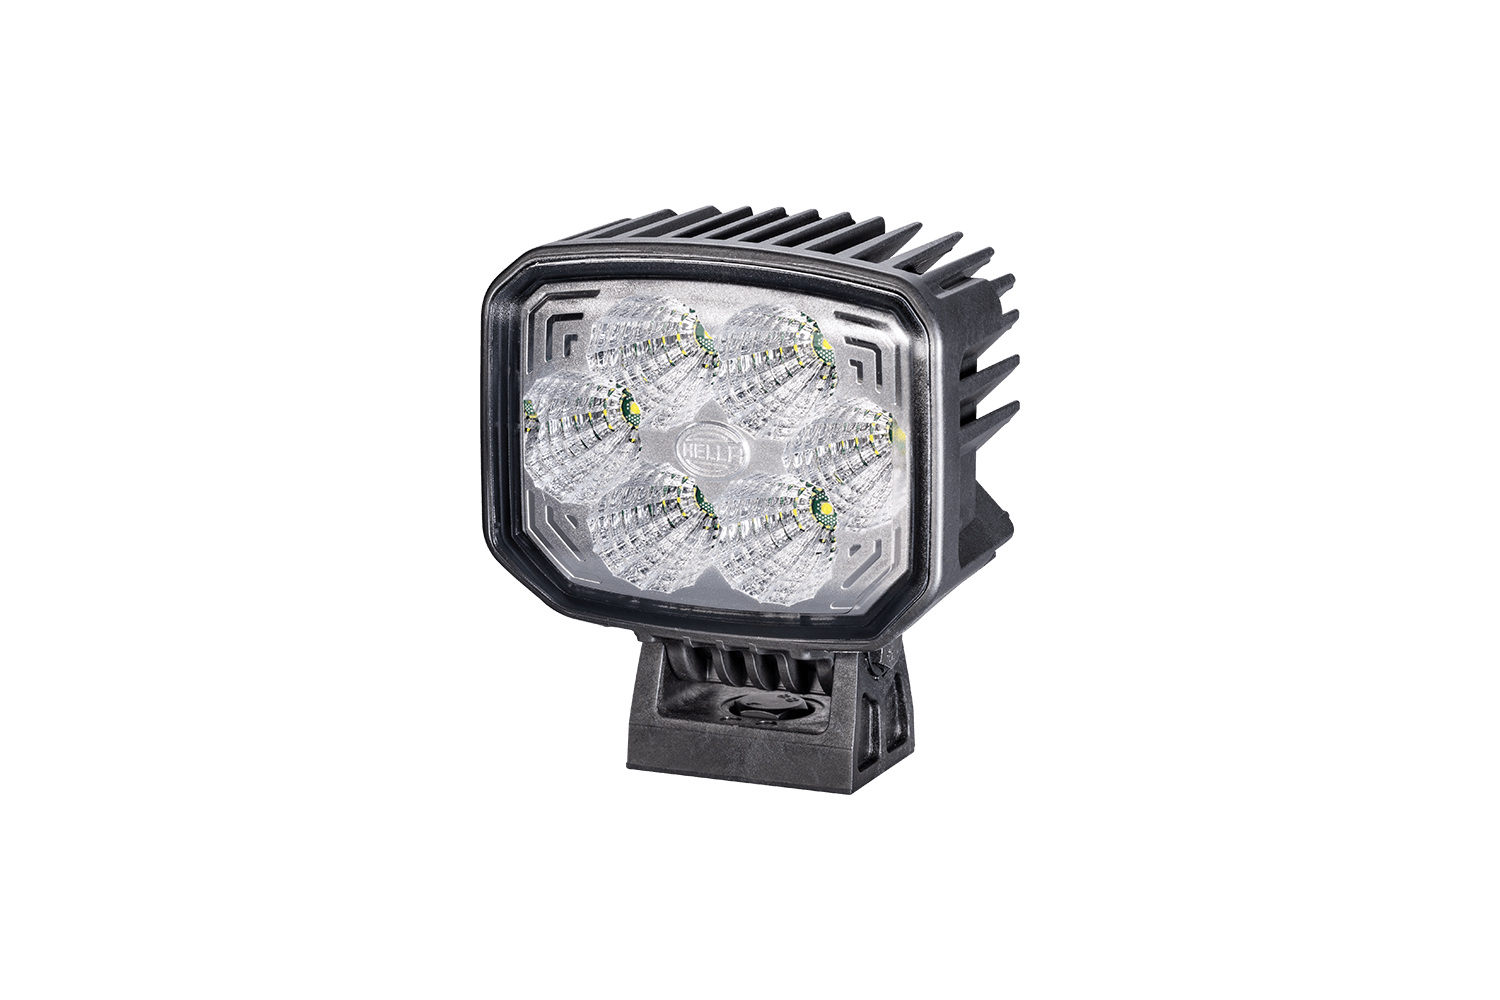 Power Beam 1800 compact work lamps from Hella offered by Patlon